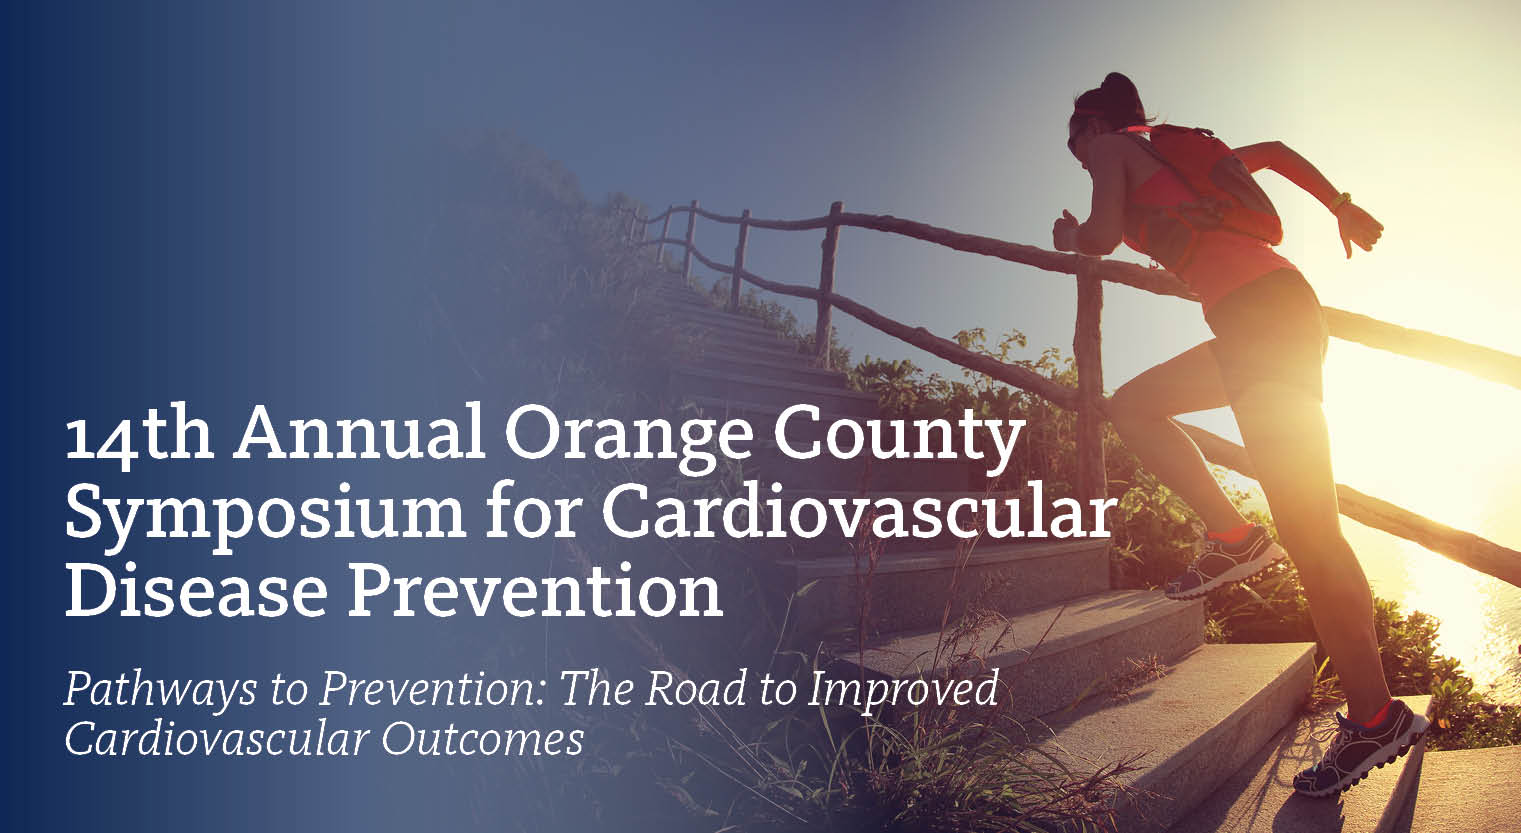 14th Annual Orange County Symposium on CVD Prevention: Crossroads in Cardiovascular Disease Prevention